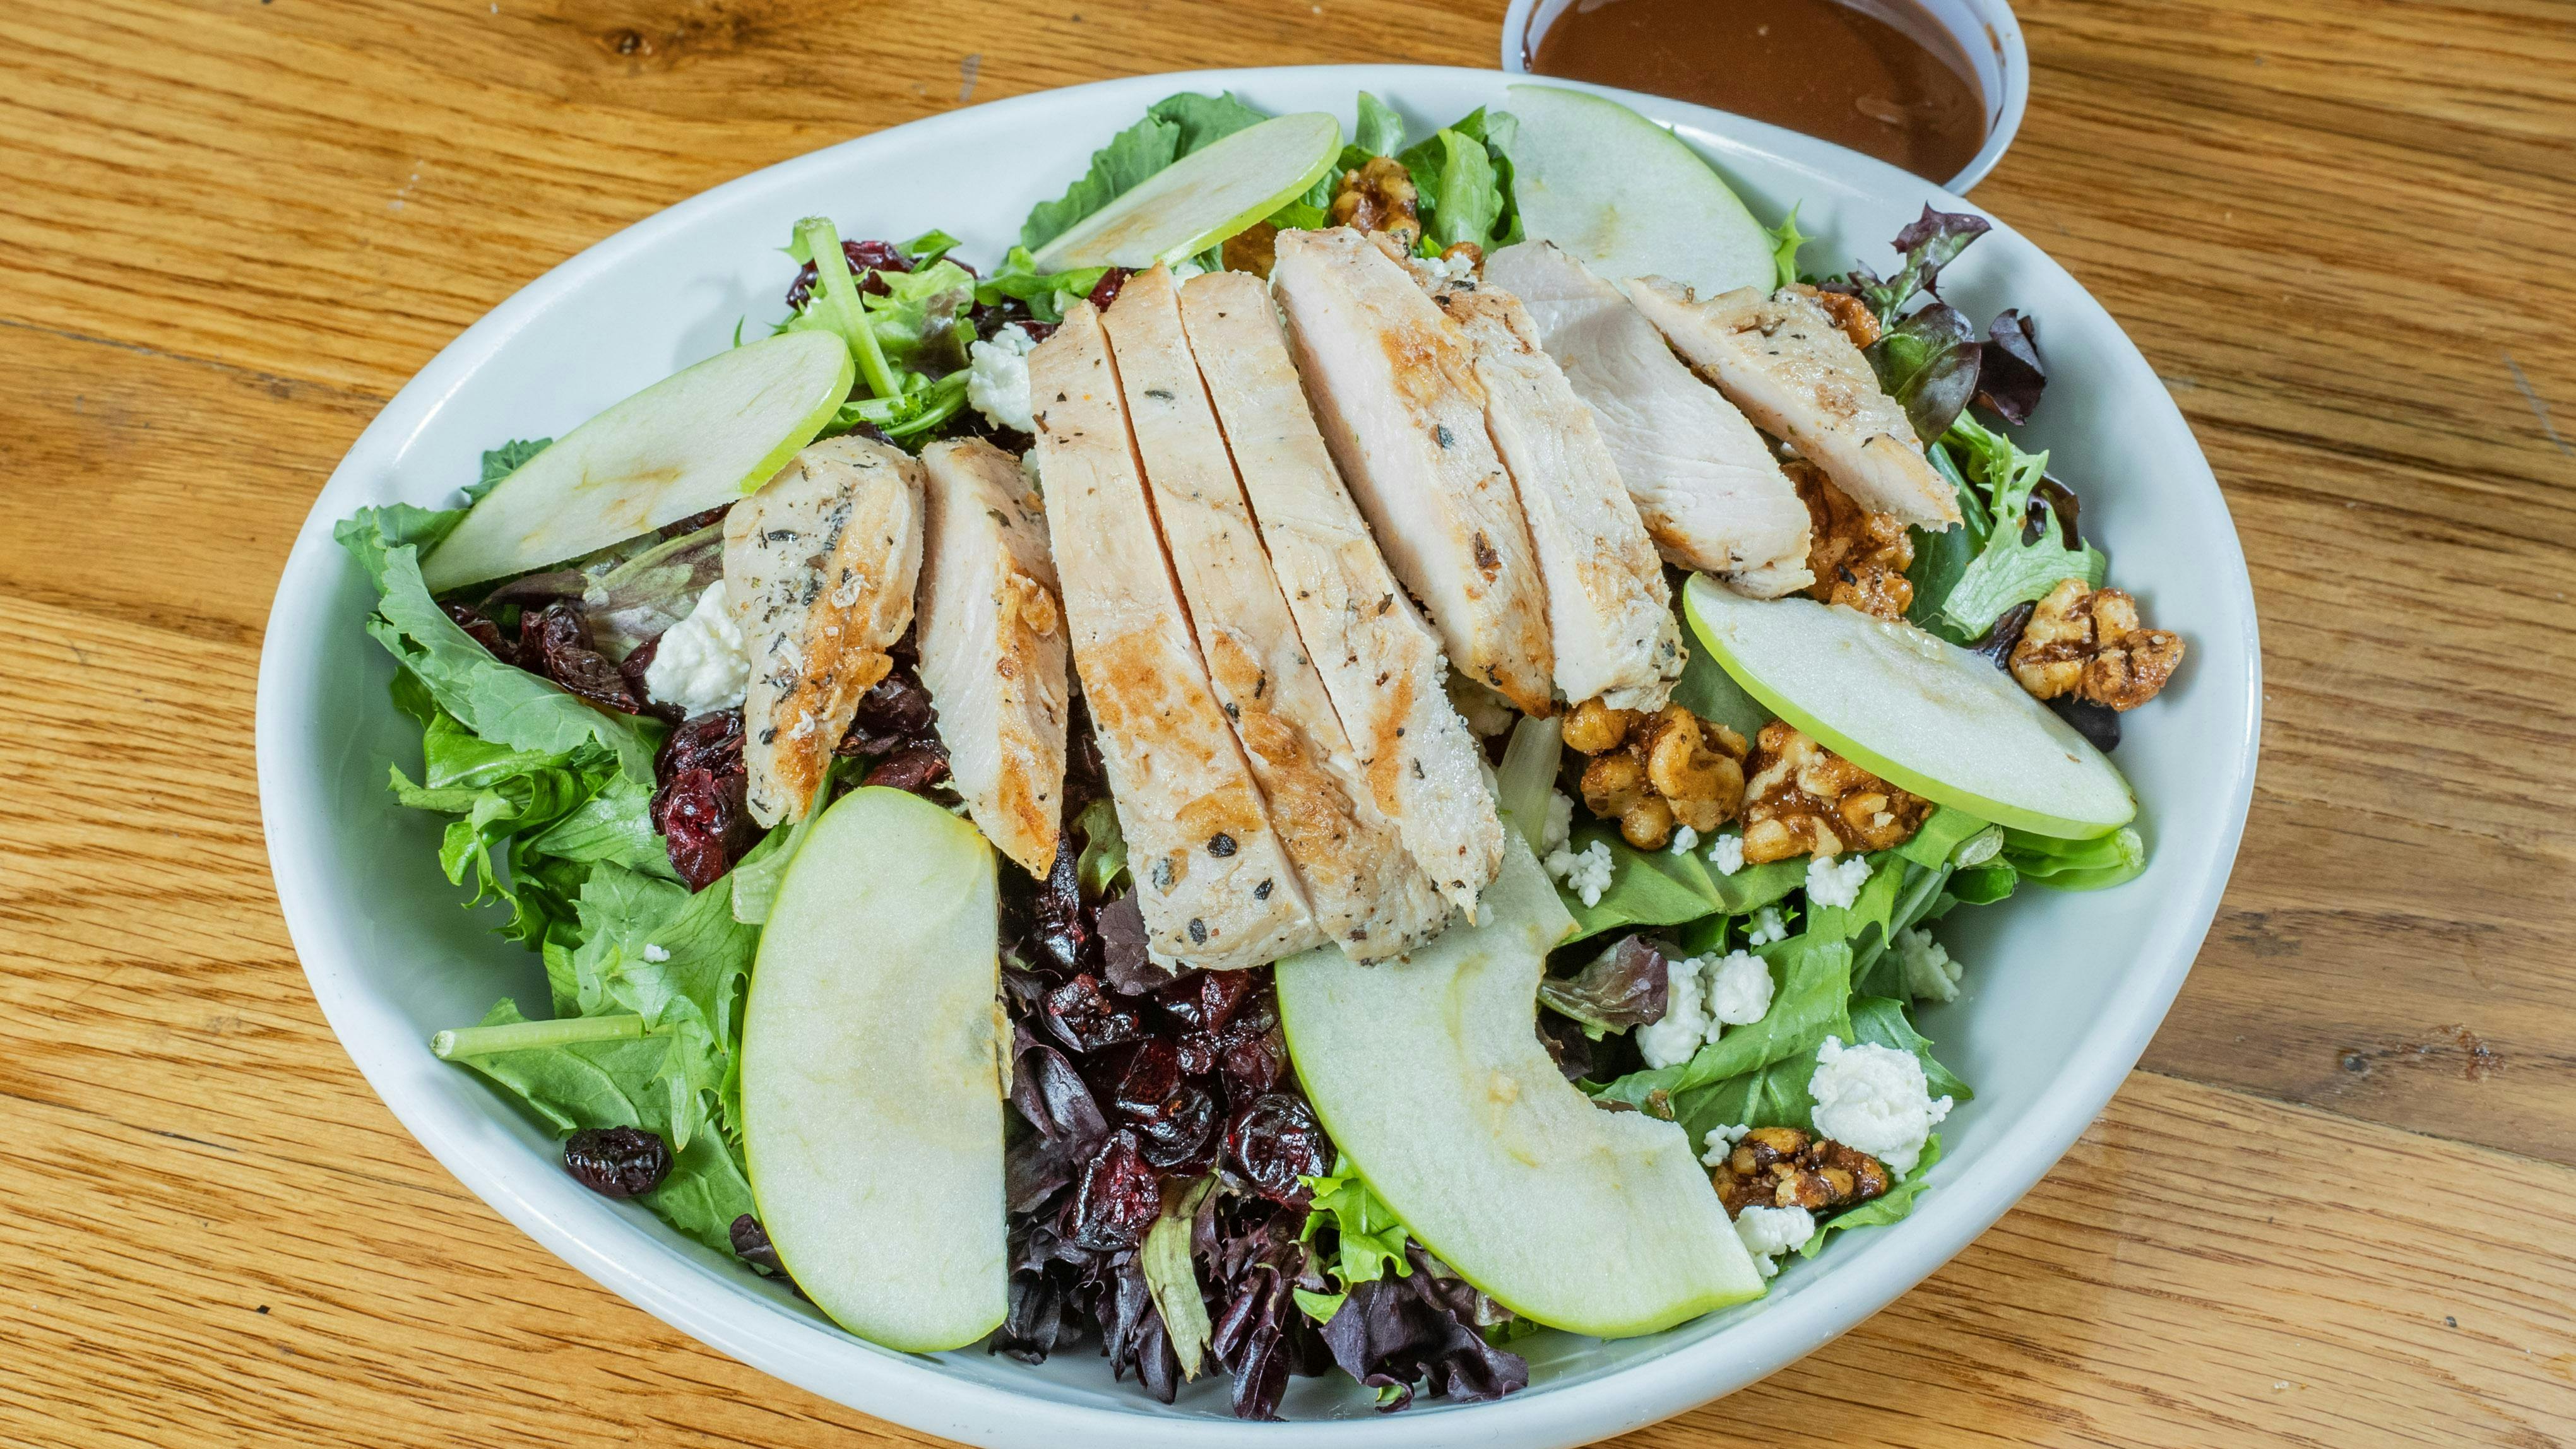 Happy Salad with Chicken from Happy Chicks - Research Blvd in Austin, TX